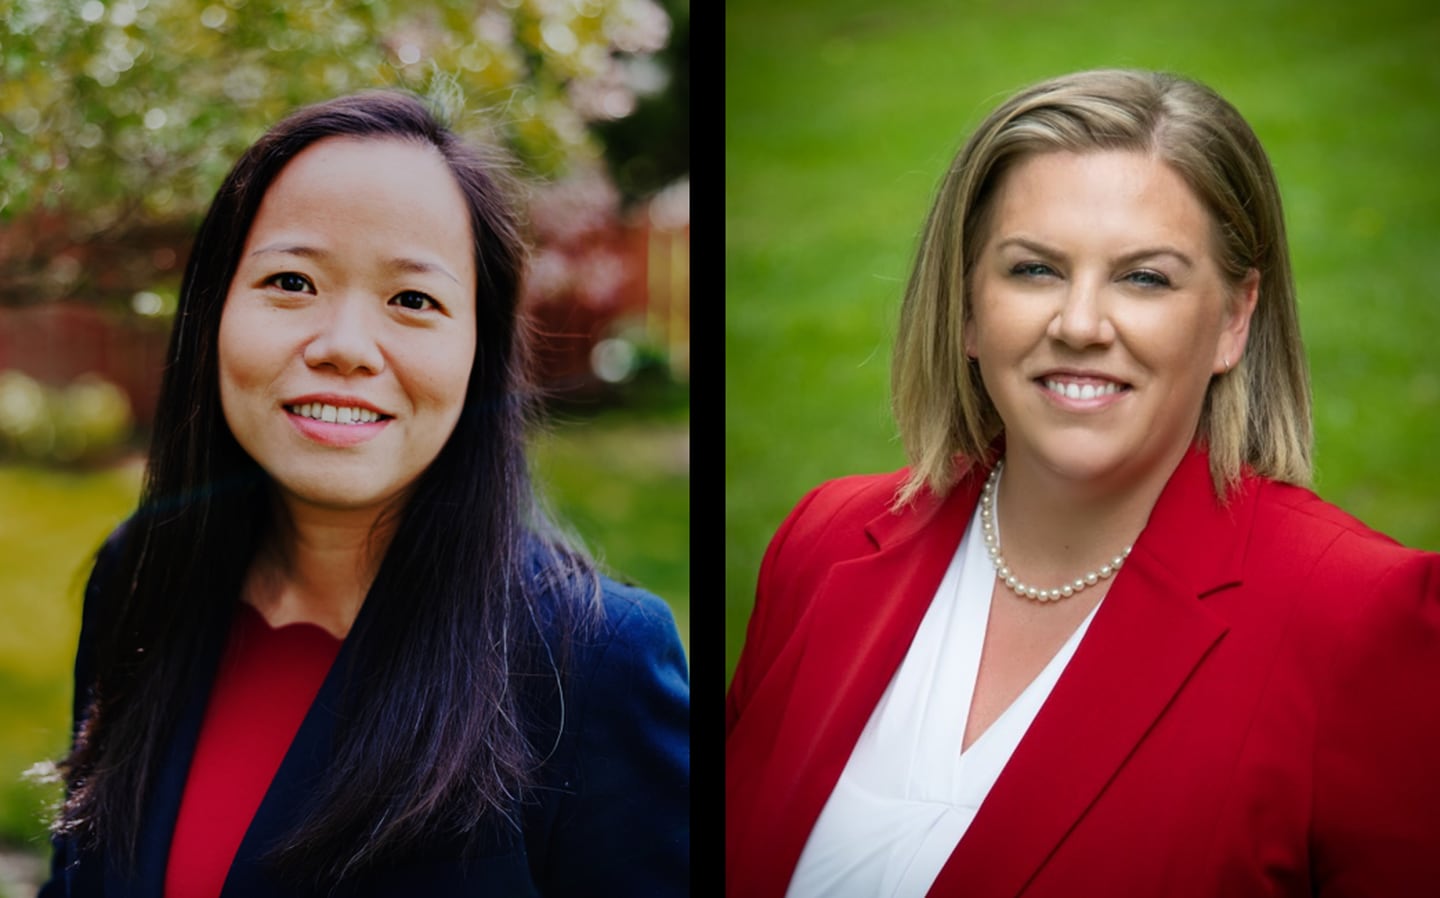 Democrat Linh Nguyen (left), and Republican Tasha Sims (right) are vying for the DeKalb County Clerk and Recorder's office in the Nov. 8, 2022 general election. (Photos provided by Linh Nguyen and Tasha Sims, respectively)